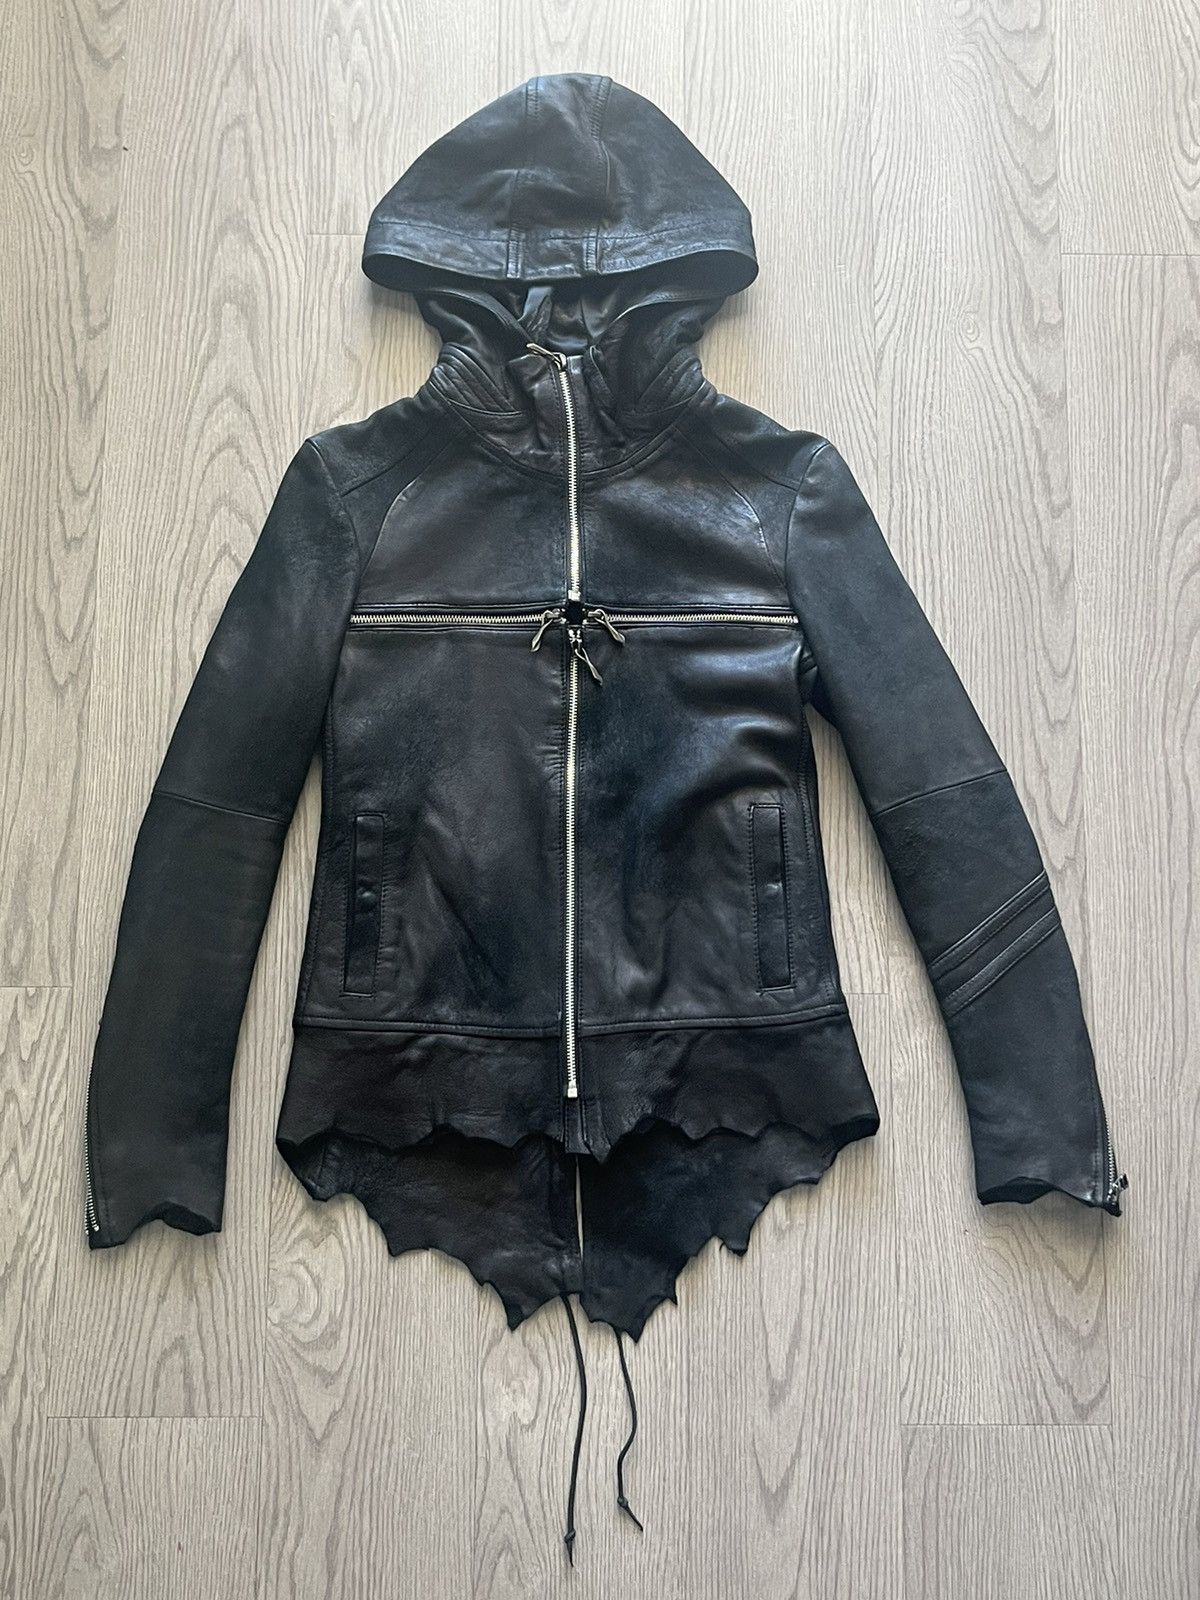 14th Addiction ***SOLD*** 14th Addiction Leather Jacket Hood | Grailed